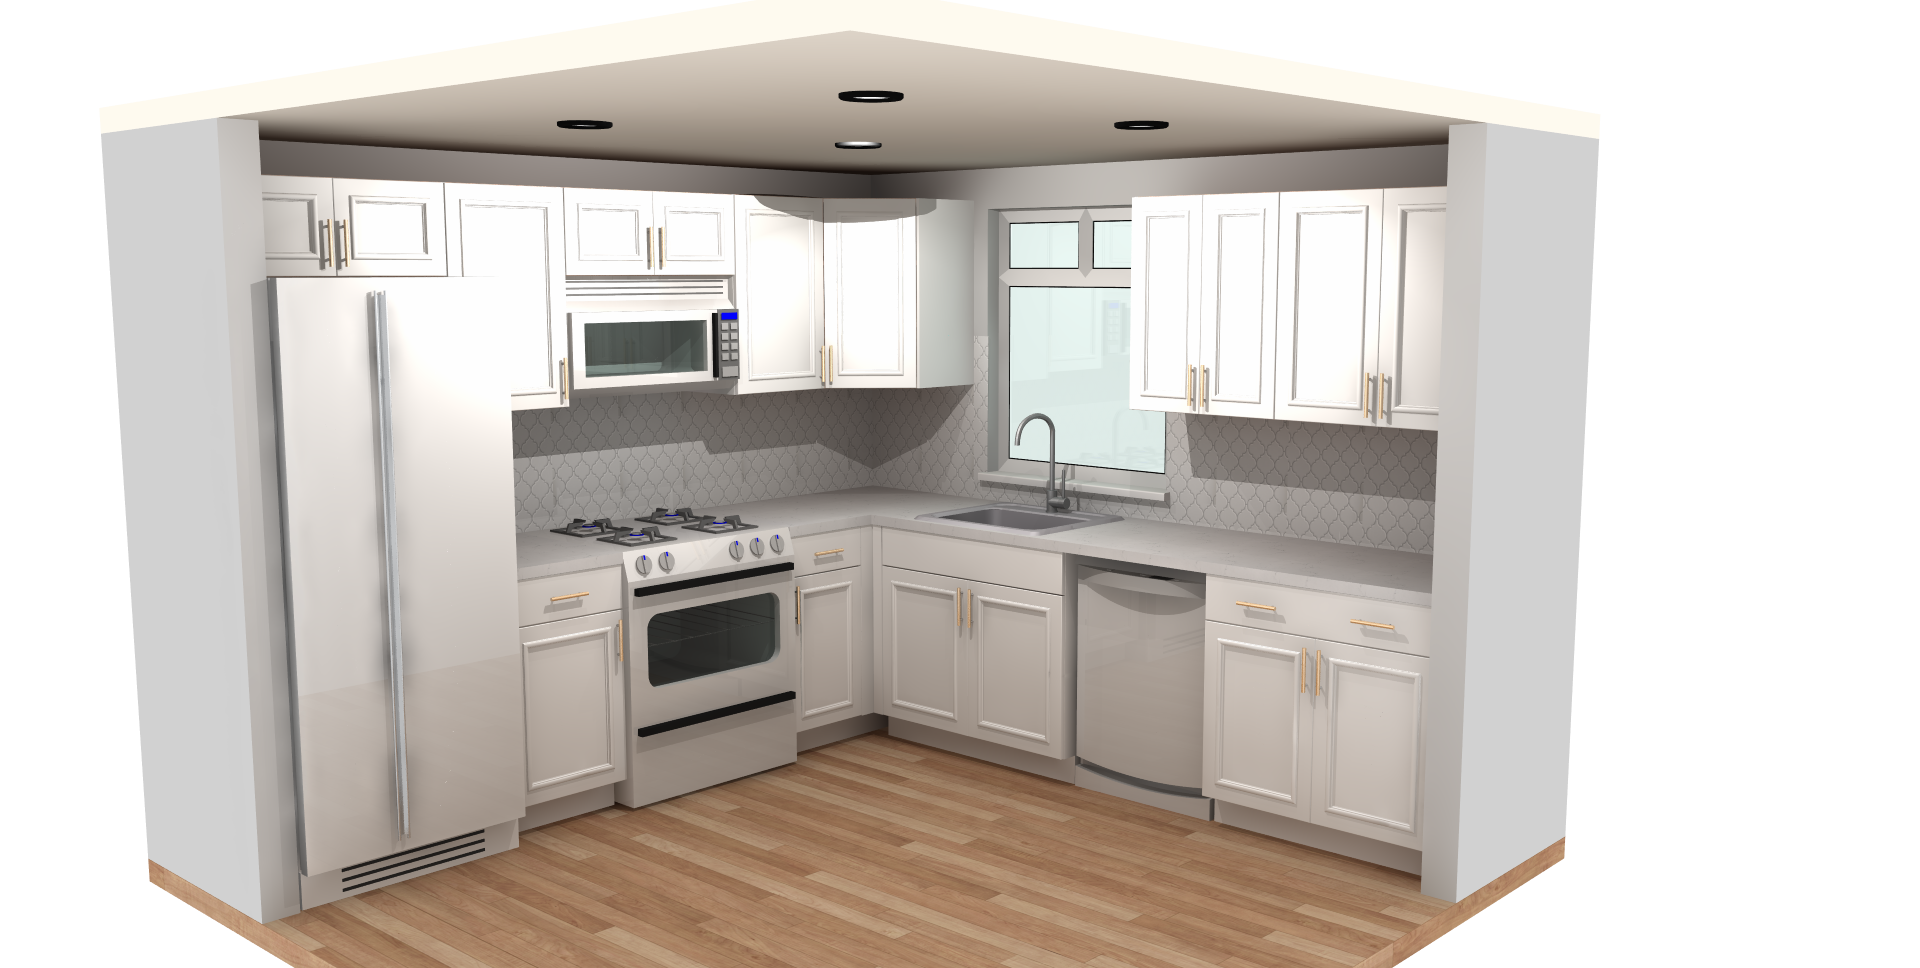 Ultracraft 10 X Kitchen Andover